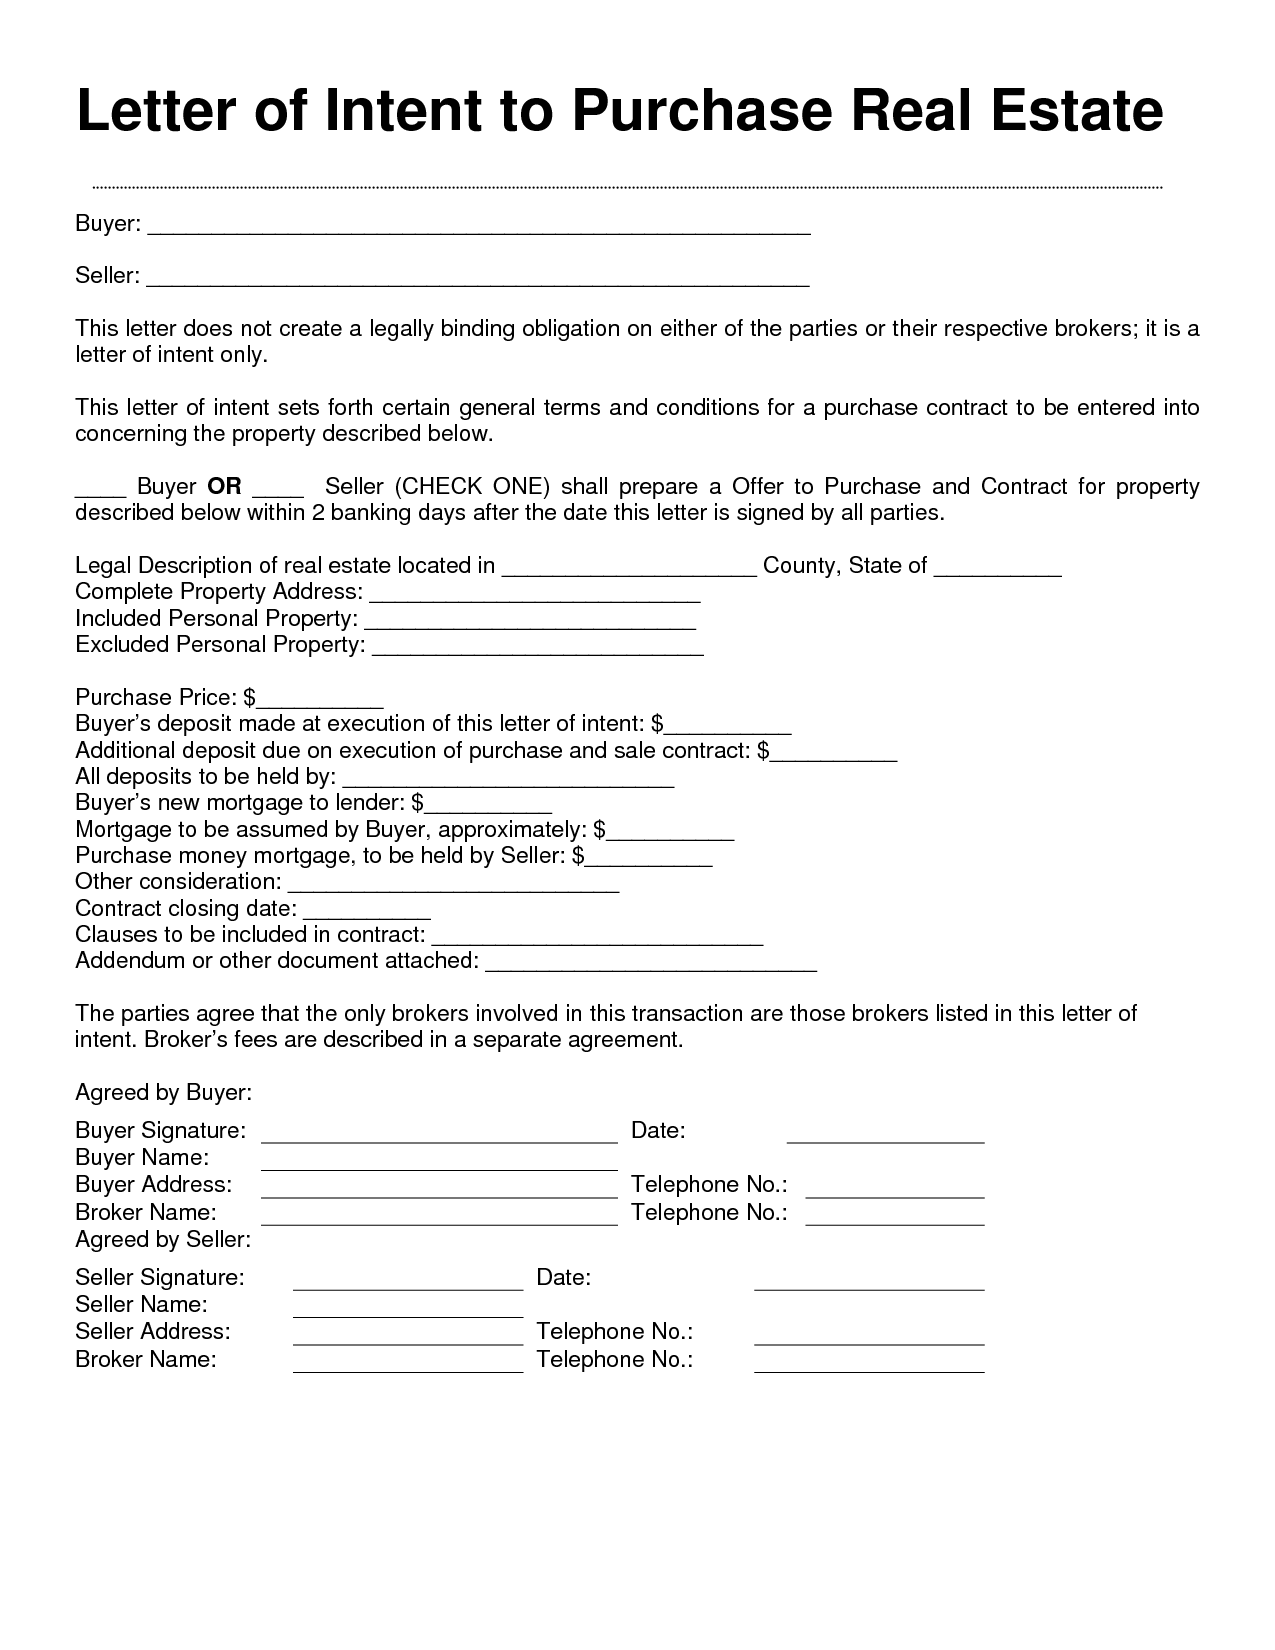 Letter Of Intent Real Estate Purchase Free Printable Documents